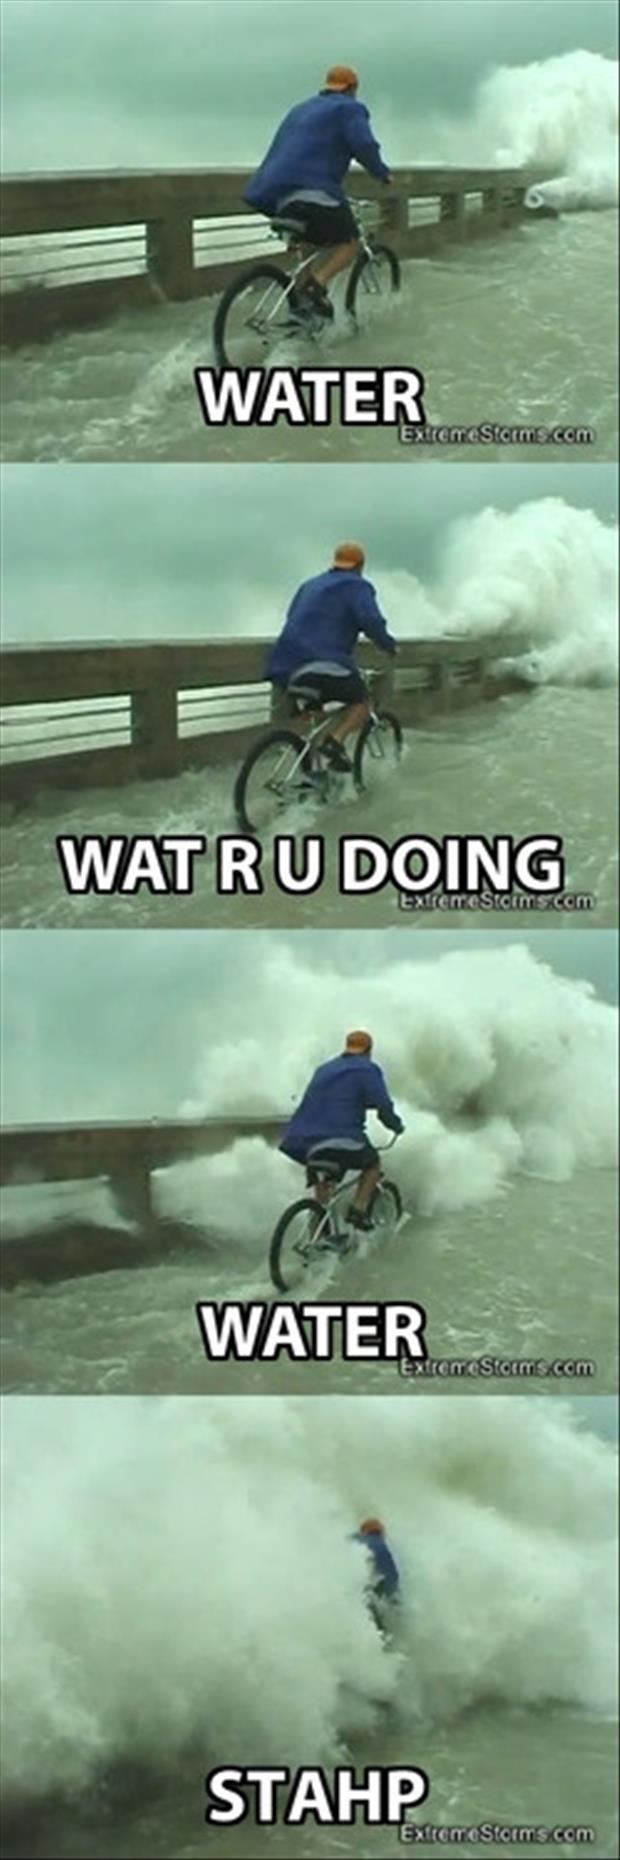 Man Riding Bicycle In Water Funny Picture